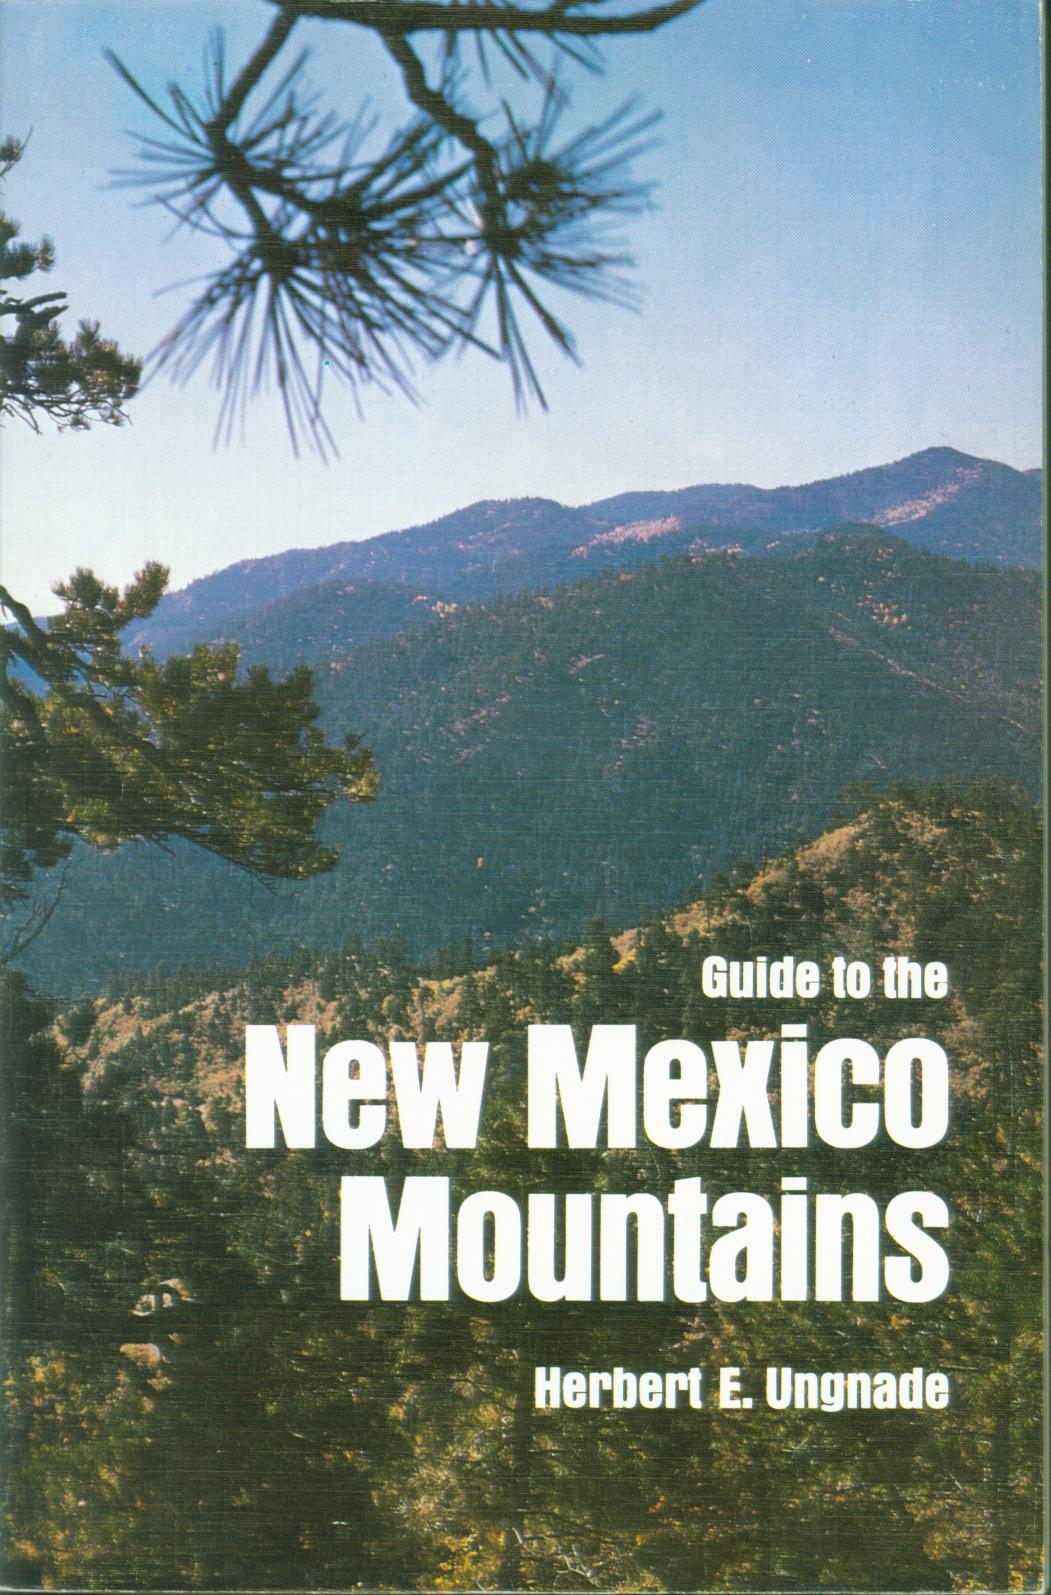 GUIDE TO THE NEW MEXICO MOUNTAINS. 